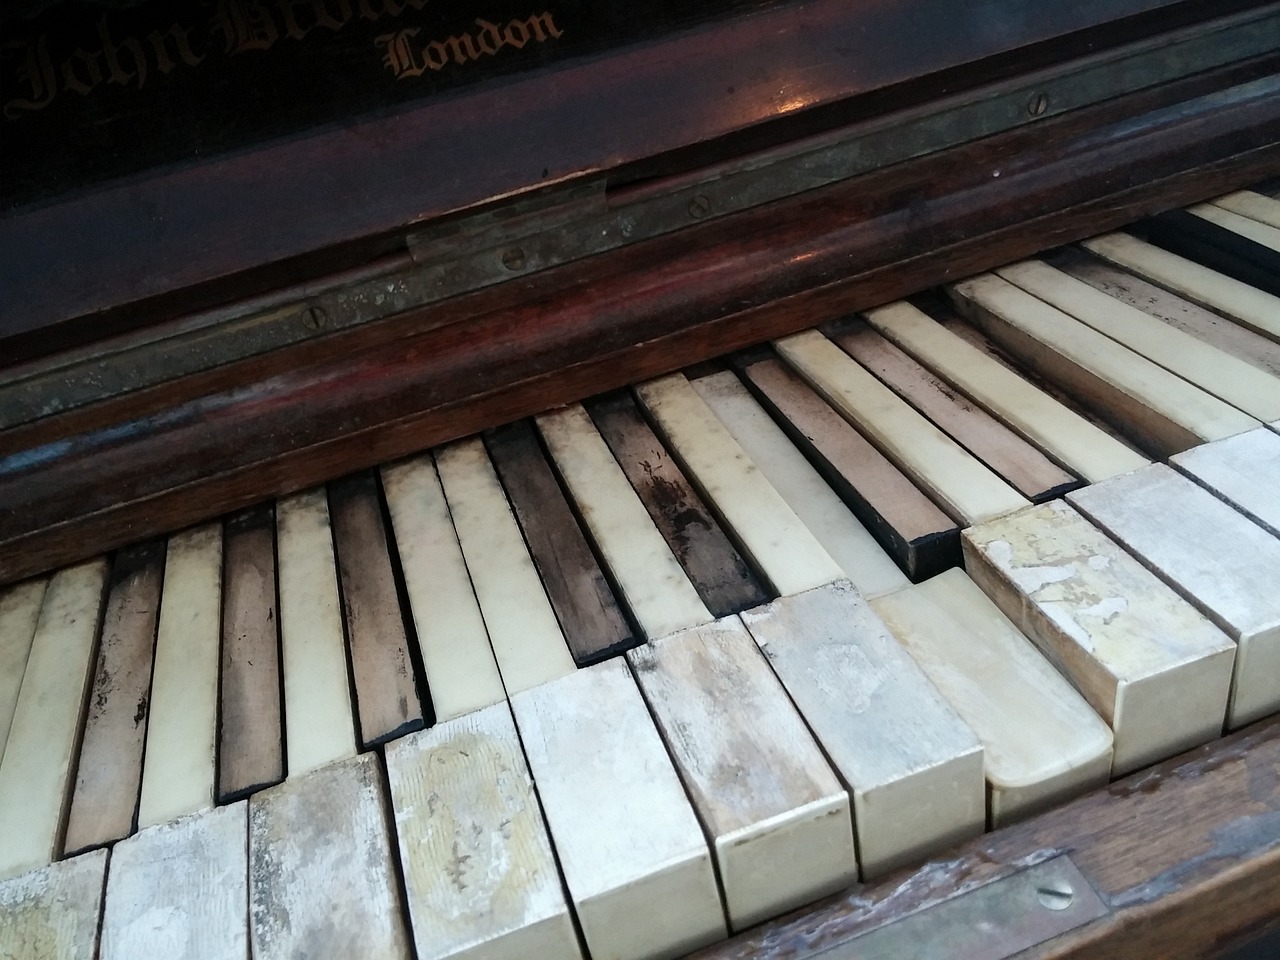 a close up of the keys of a piano, by Samuel Birmann, synthetism, broken tiles, london, in the middle of the day, bone and ivory